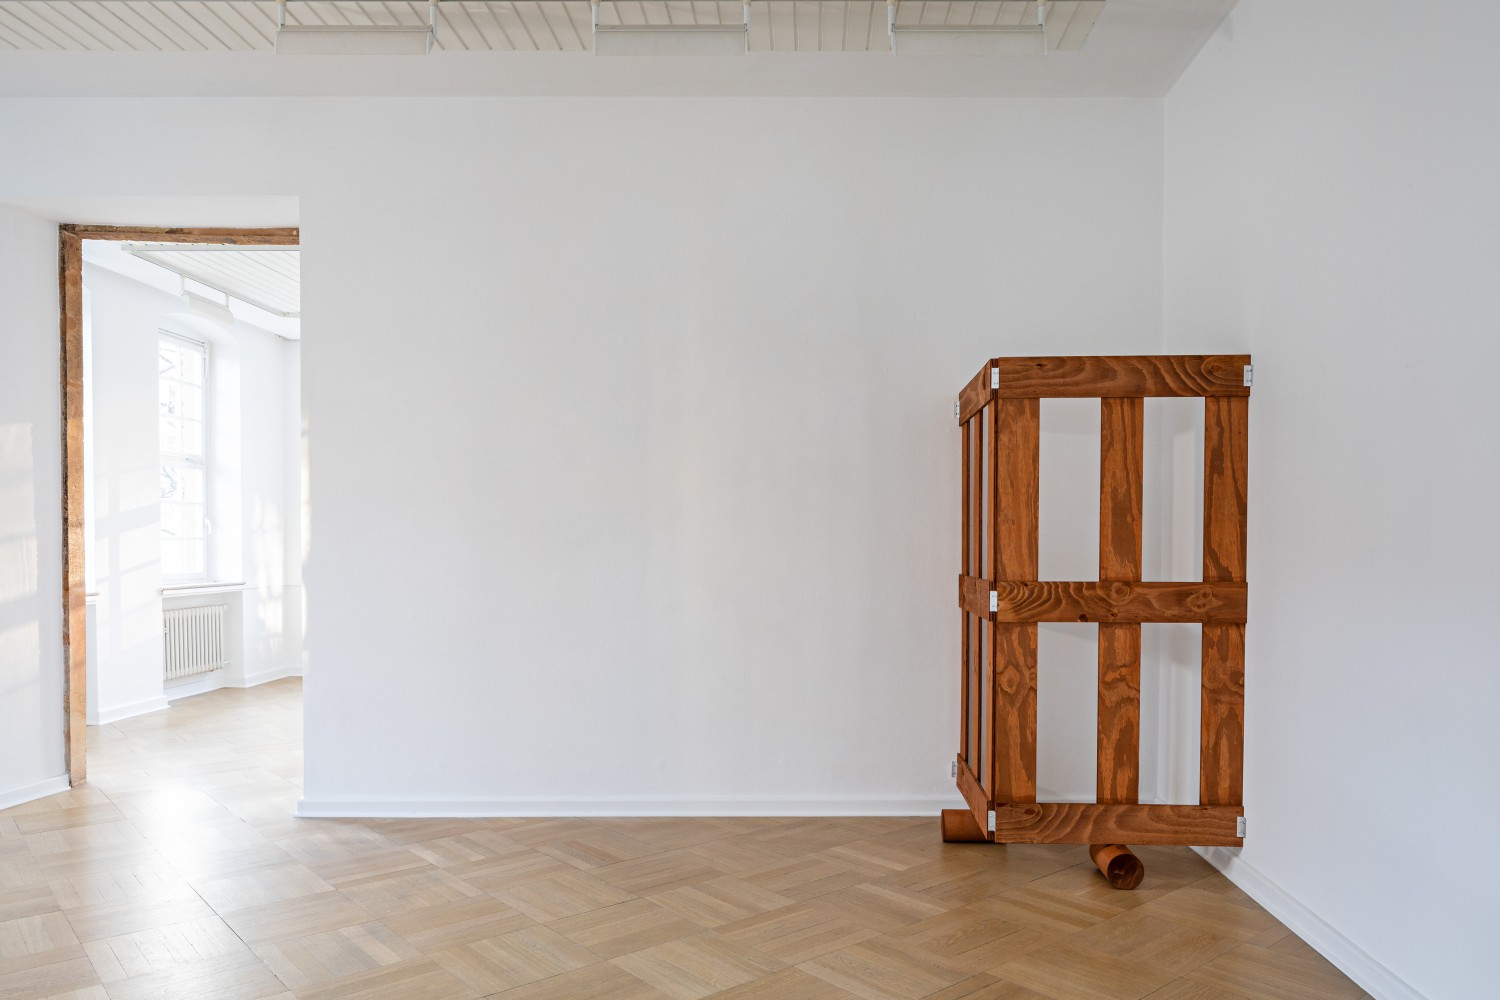 In the next room, the two-sided wooden gate continues. Here, too, it stands on two wooden rollers and the open sides are mounted on the wall.